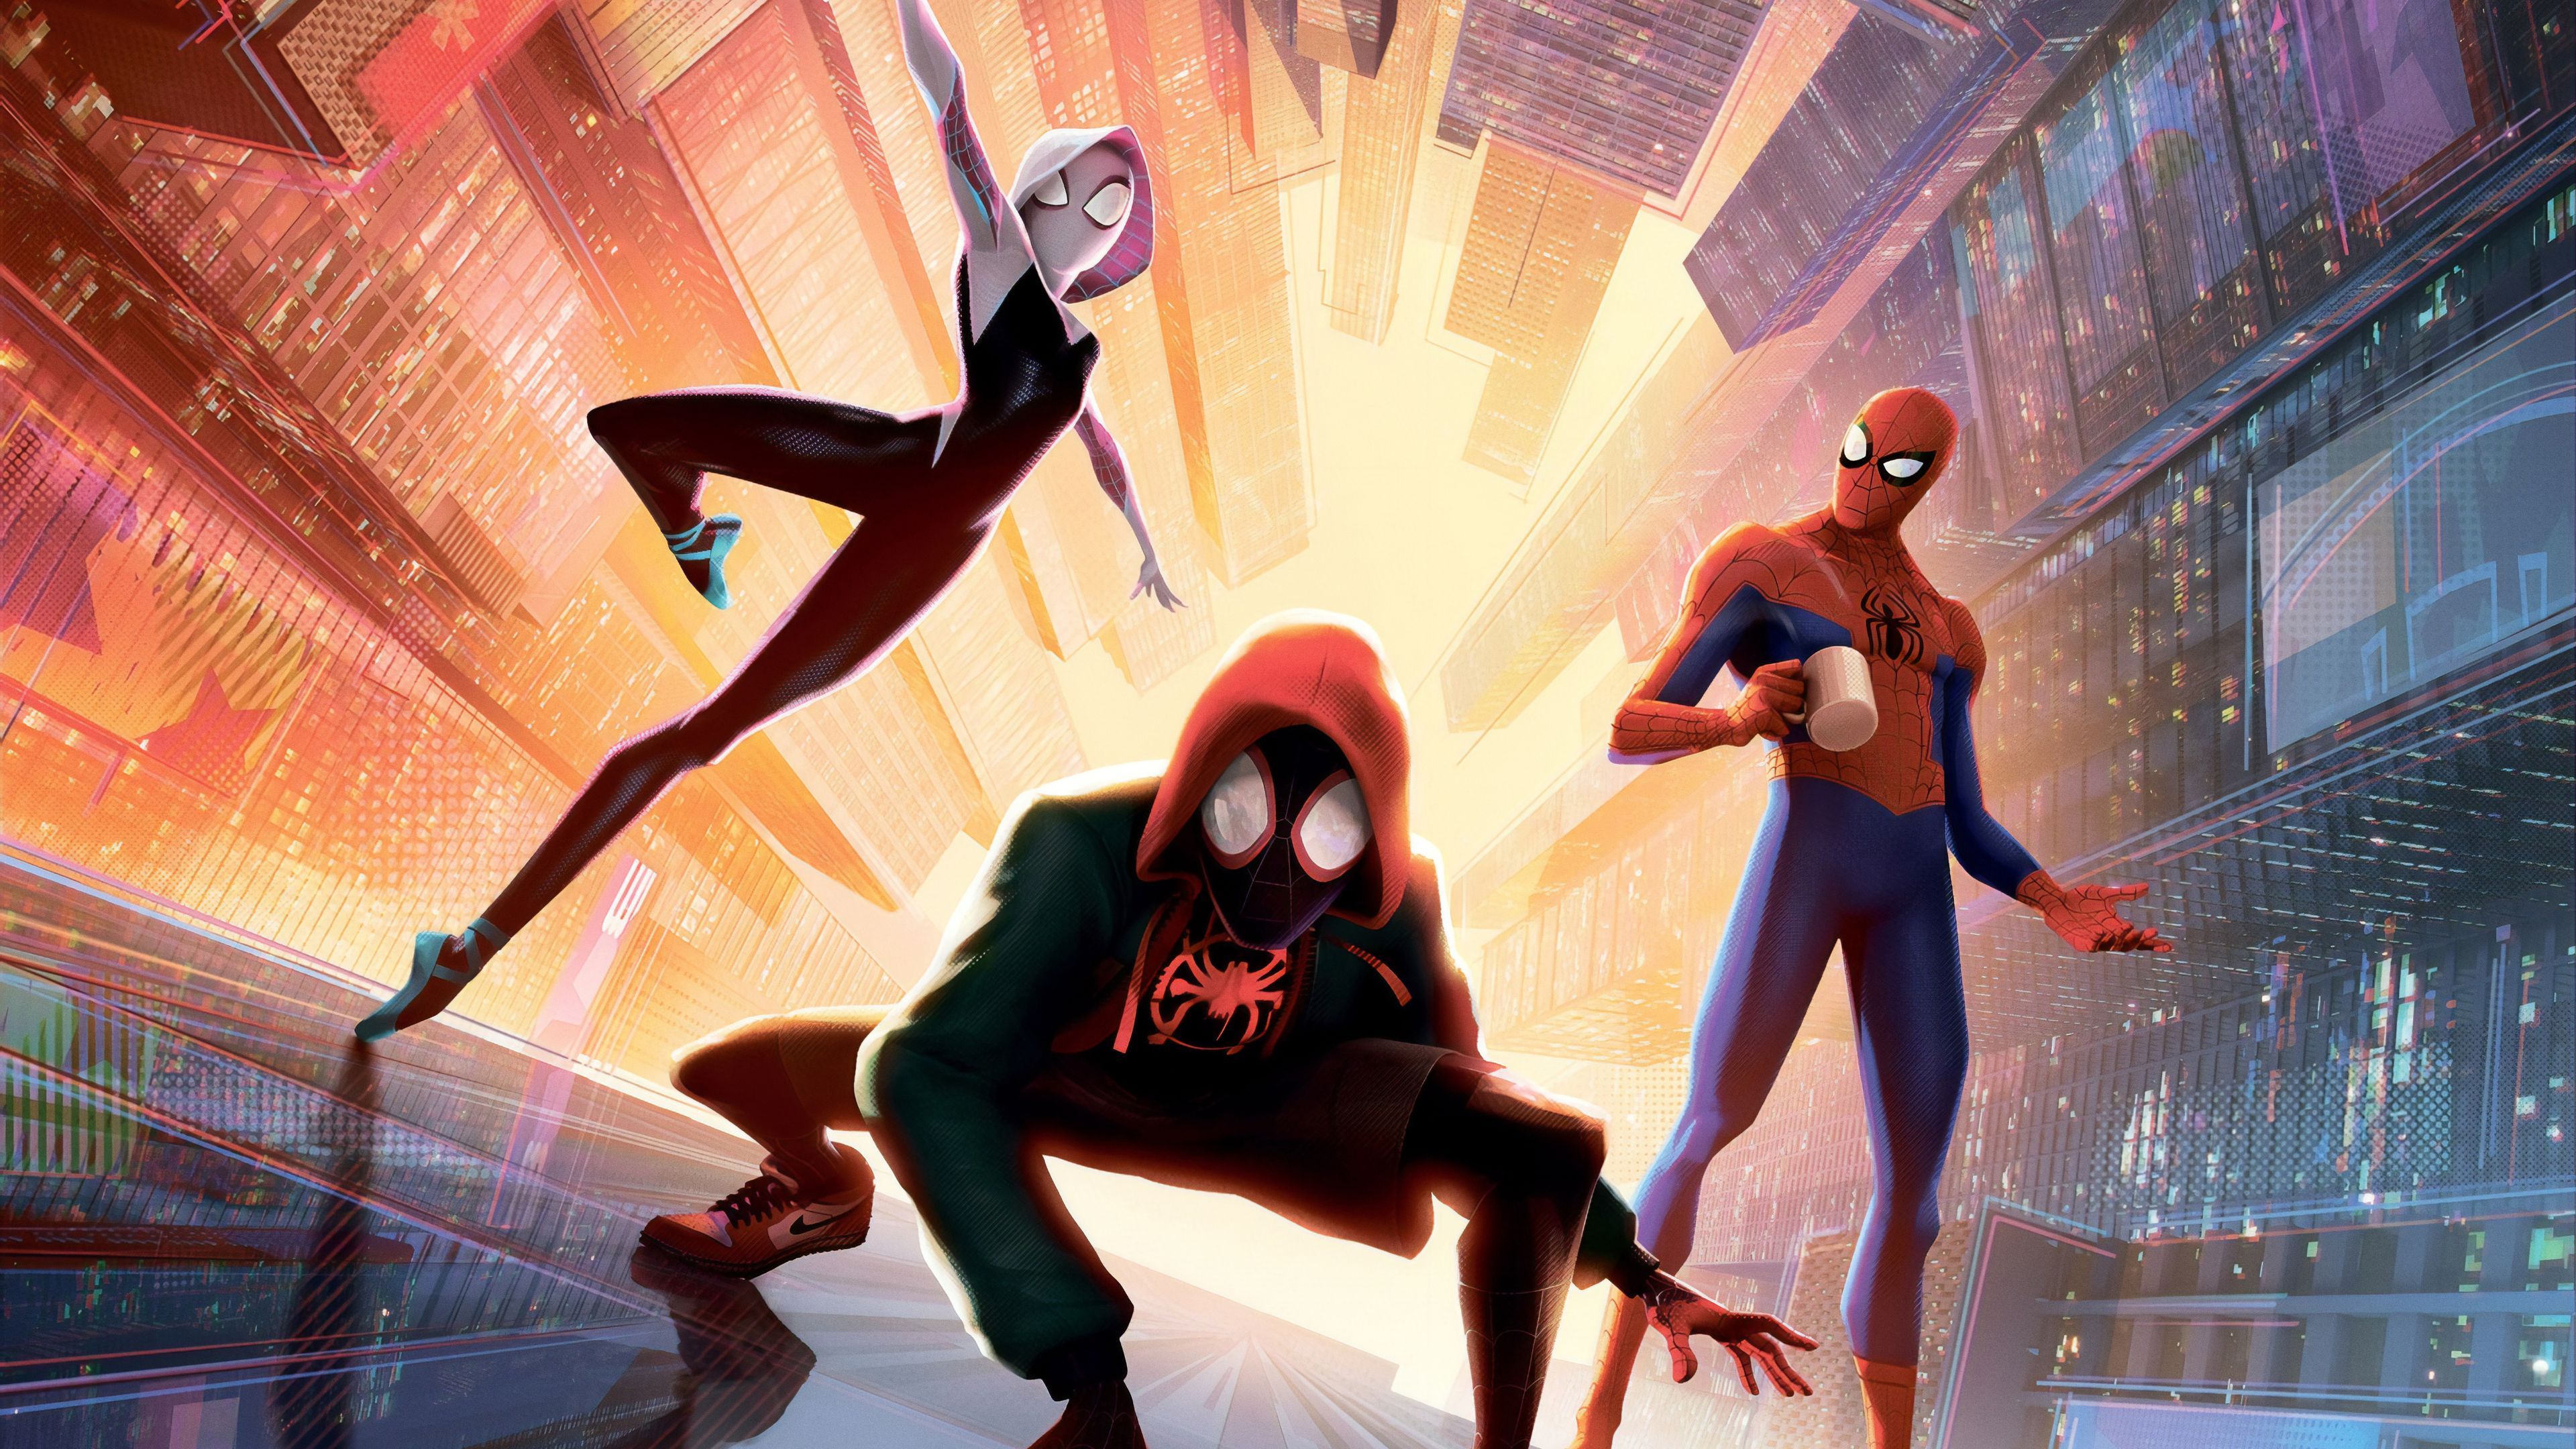 SpiderMan Into The Spider Verse New New 4k spiderman wallpaper, spiderman into the spider verse wallpaper, movies. Animated movies, Spiderman, Movie wallpaper